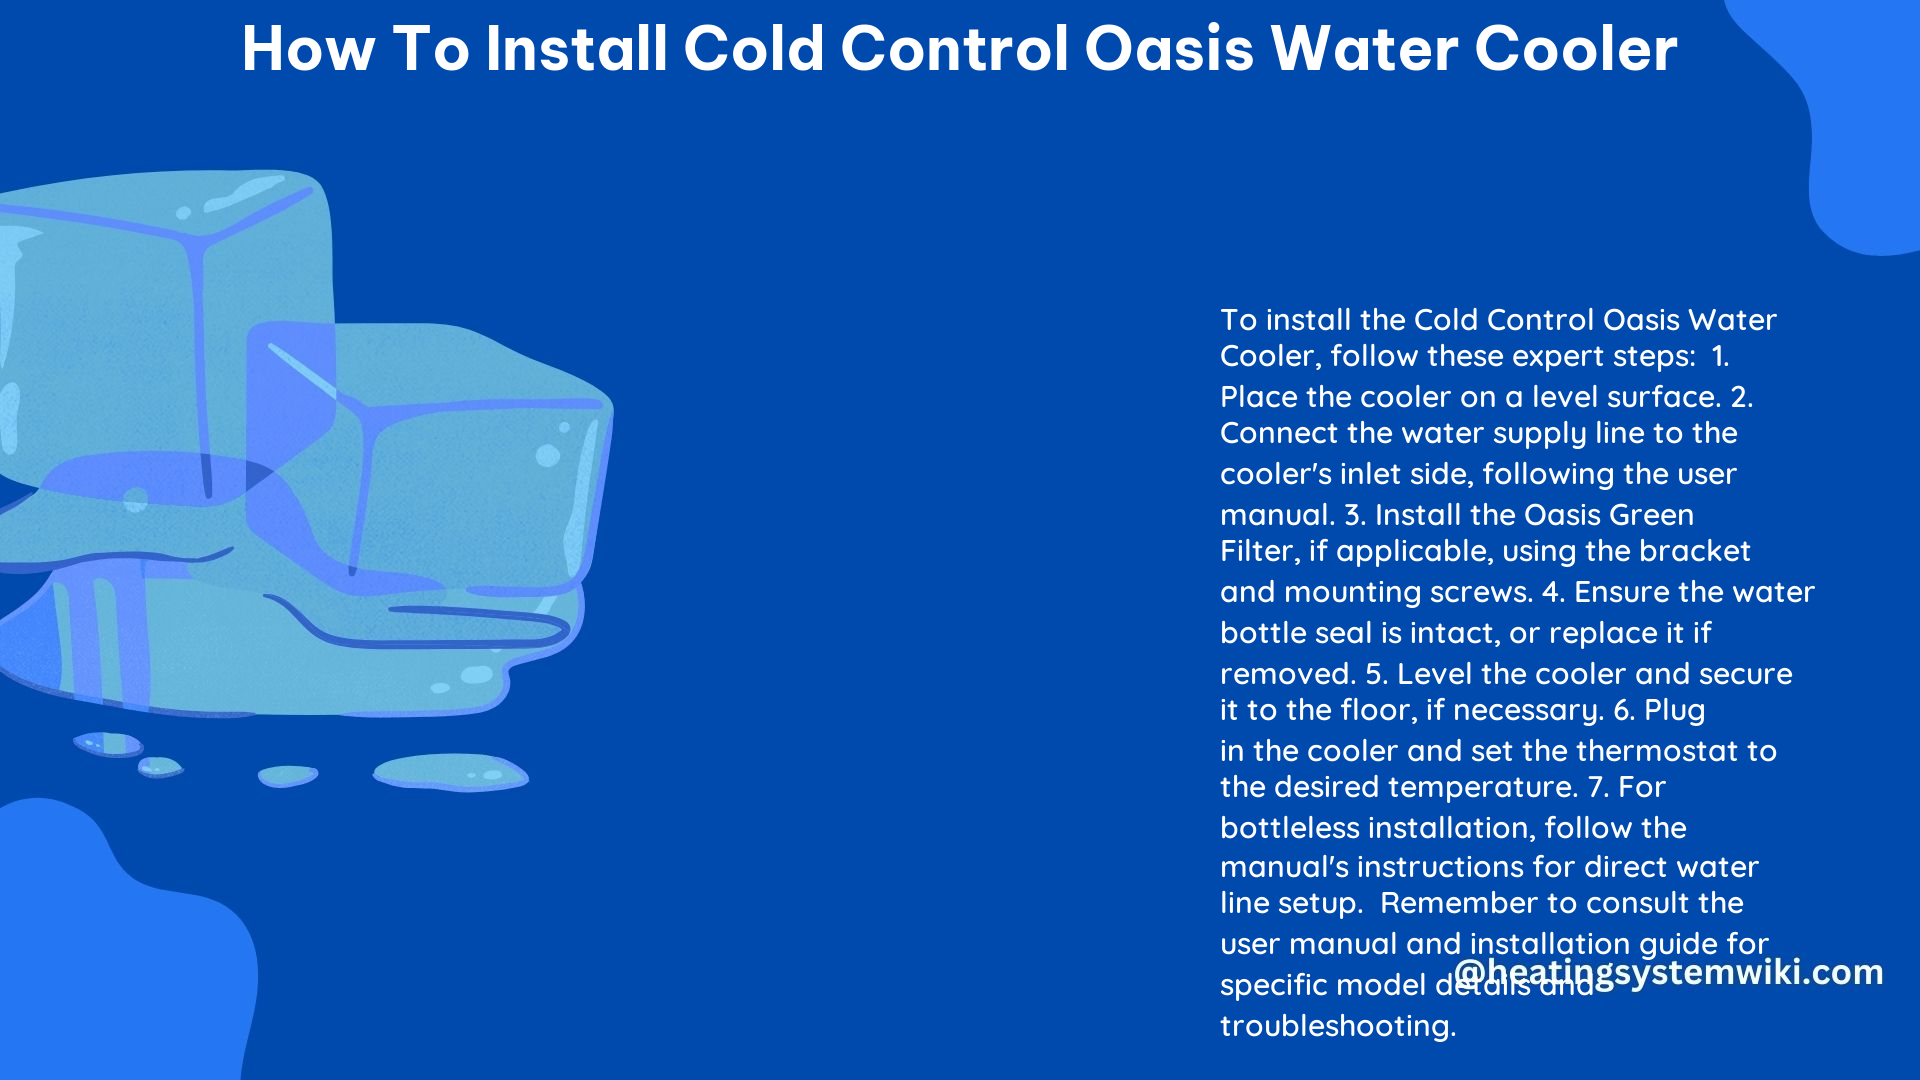 How to Install Cold Control Oasis Water Cooler